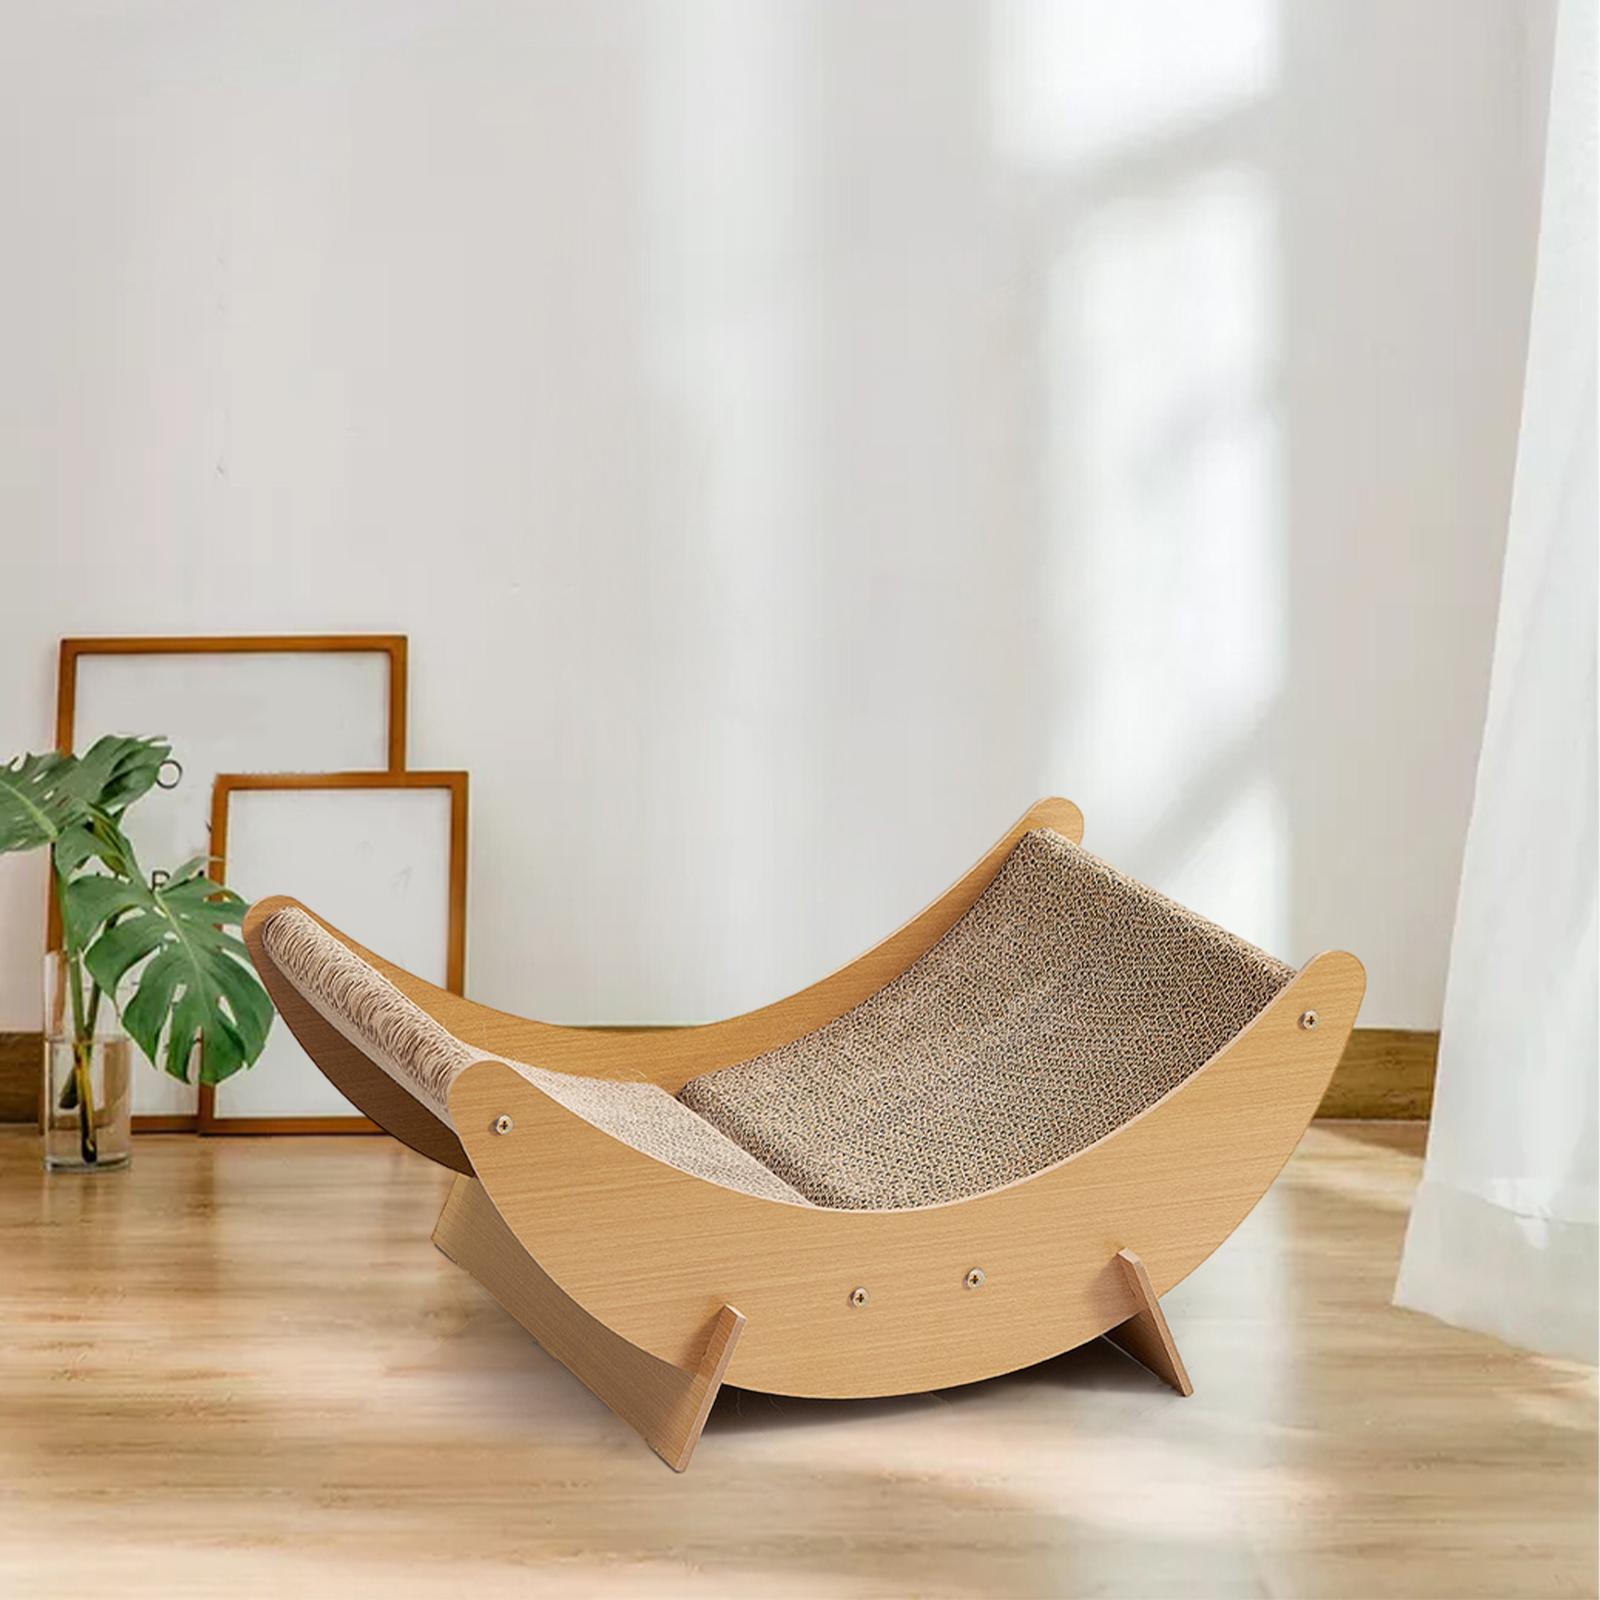 1 Piece Creative Moon Shape Wear-resistant Corrugated Paper Scratching Post, Multifunctional Sofa Cat Nest For Rest